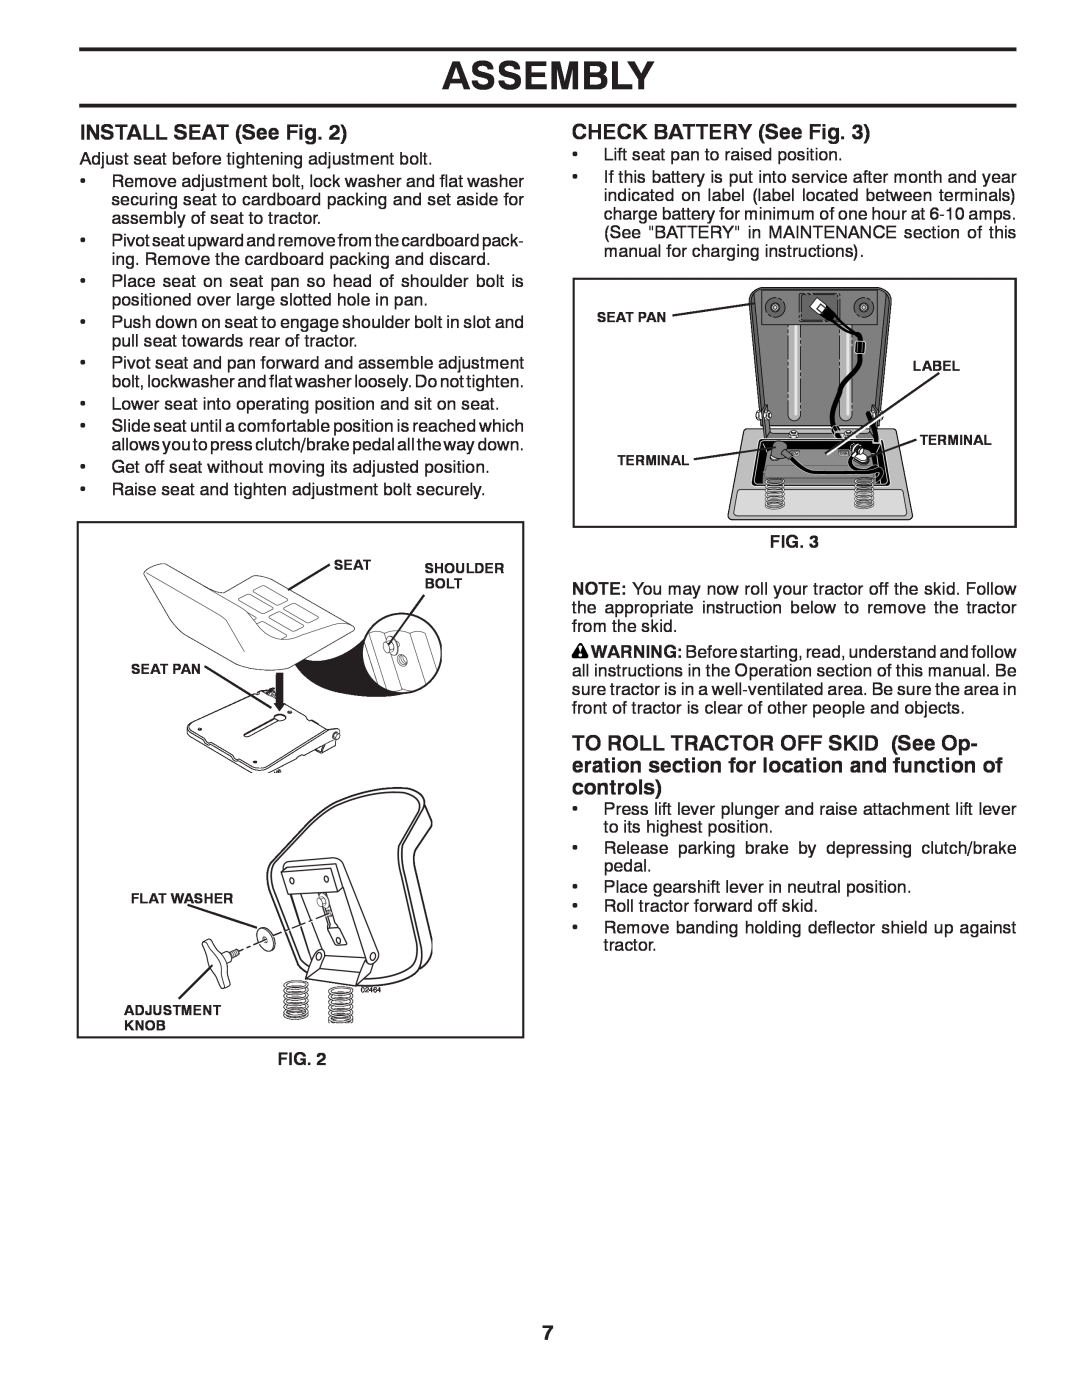 Poulan PP14538 manual INSTALL SEAT See Fig, CHECK BATTERY See Fig, Assembly 